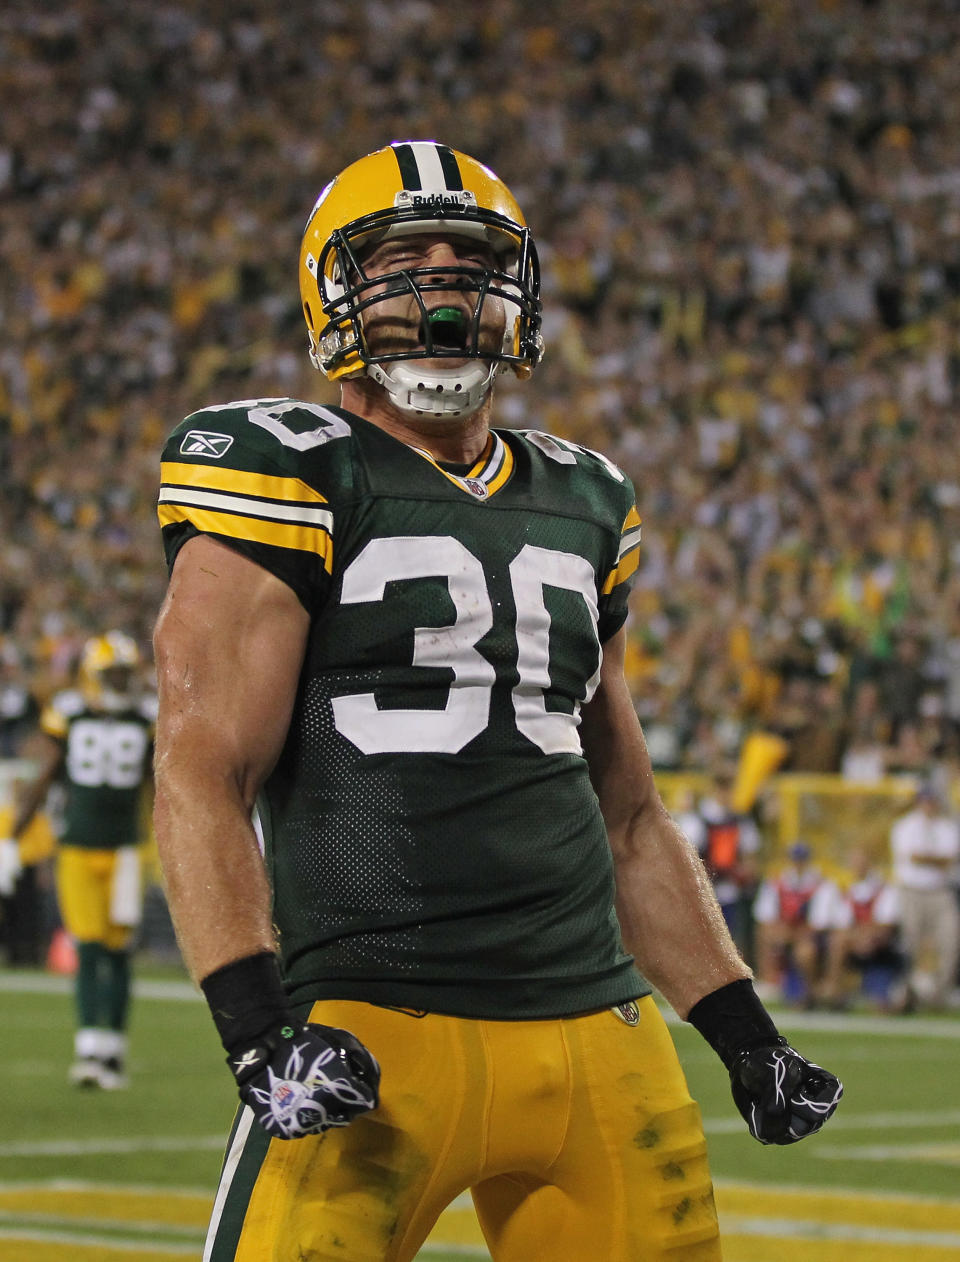 GREEN BAY, WI - SEPTEMBER 08: John Kuhn #30 of the Green Bay Packers celebrates after scoring a touchdown against the New Orleans Saints during the NFL opening season game at Lambeau Field on September 8, 2011 in Green Bay, Wisconsin. (Photo by Jonathan Daniel/Getty Images)